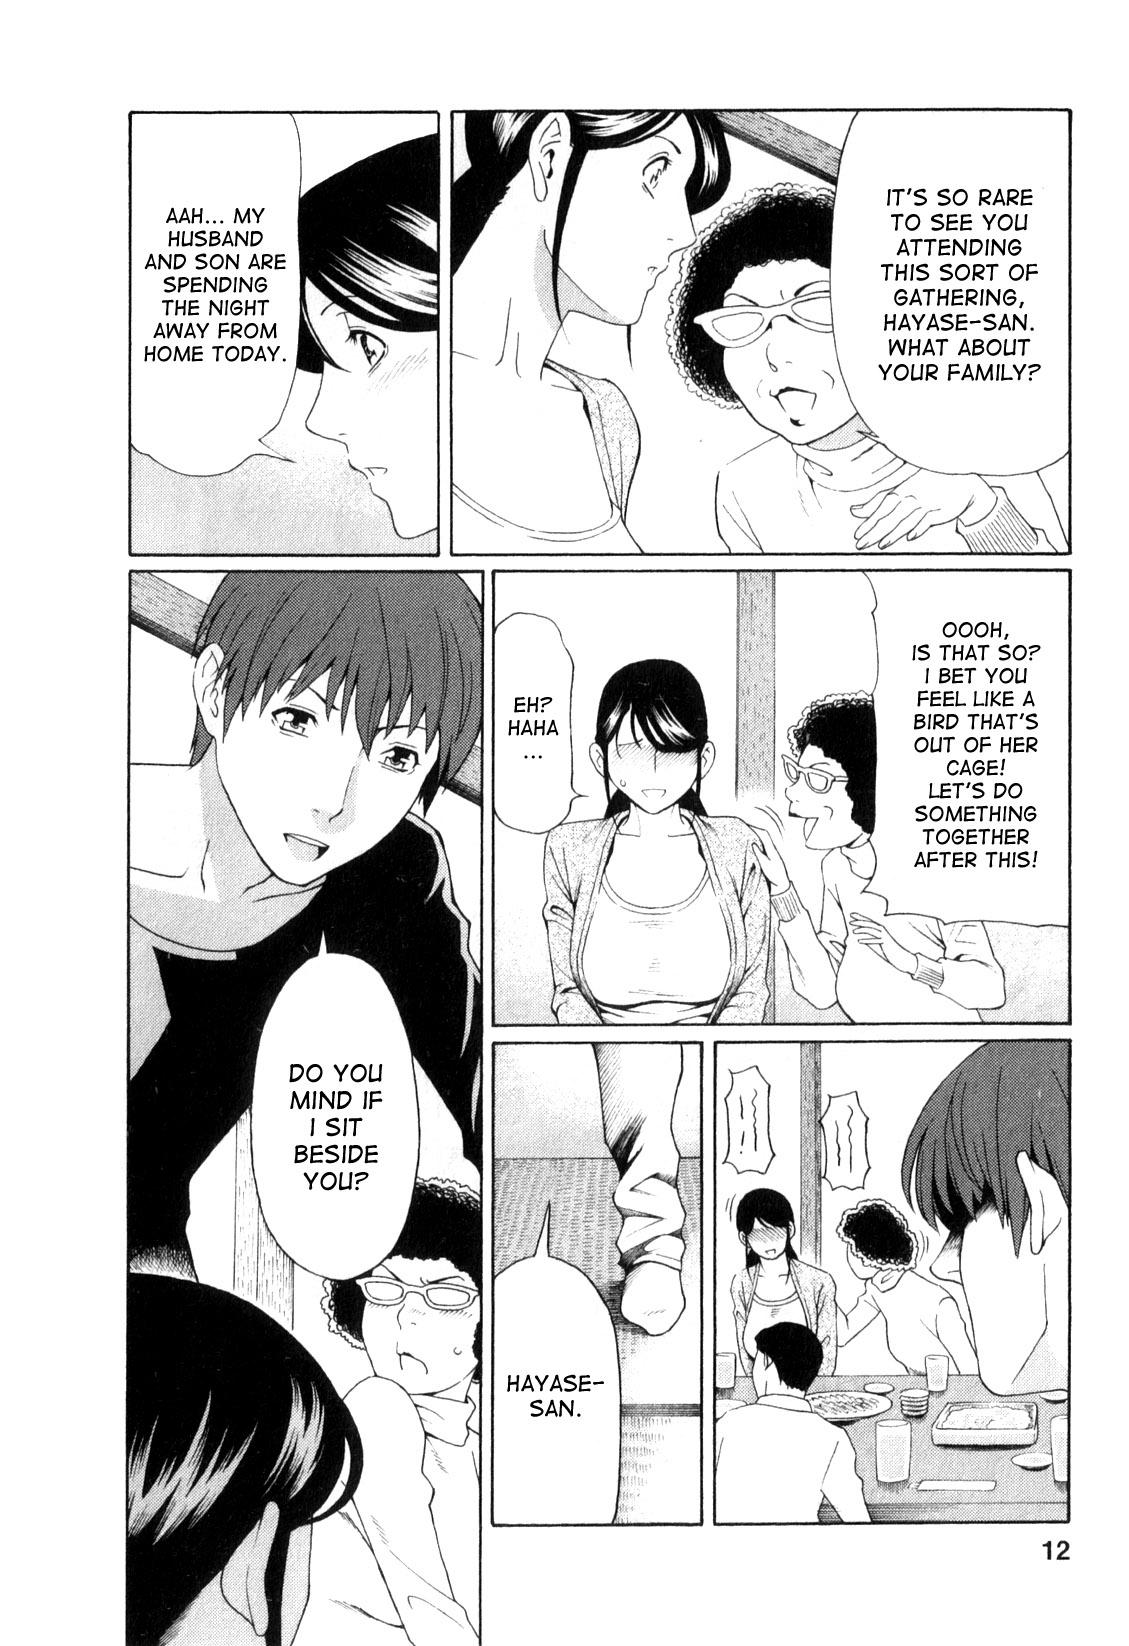 Face Fucking Ingi no Hate 1 Ch. 1-6 Gay Straight - Page 11